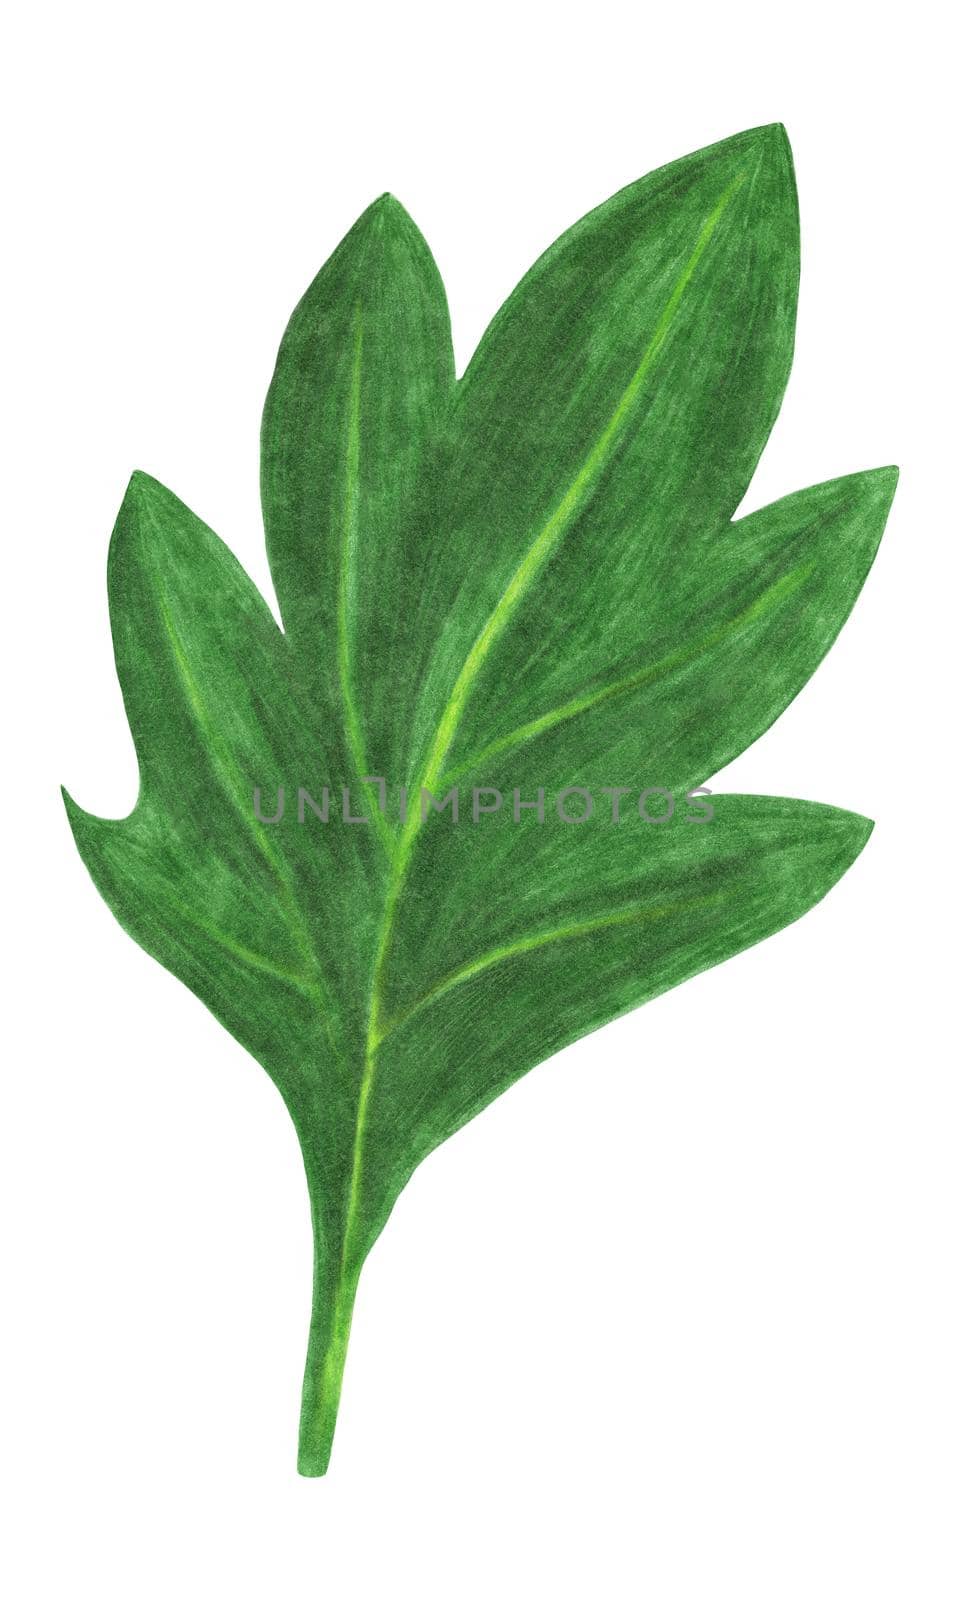 Green Leaf of Chrysanthemum Isolated on White Background. Flower Leaf Element Drawn by Color Pencil.